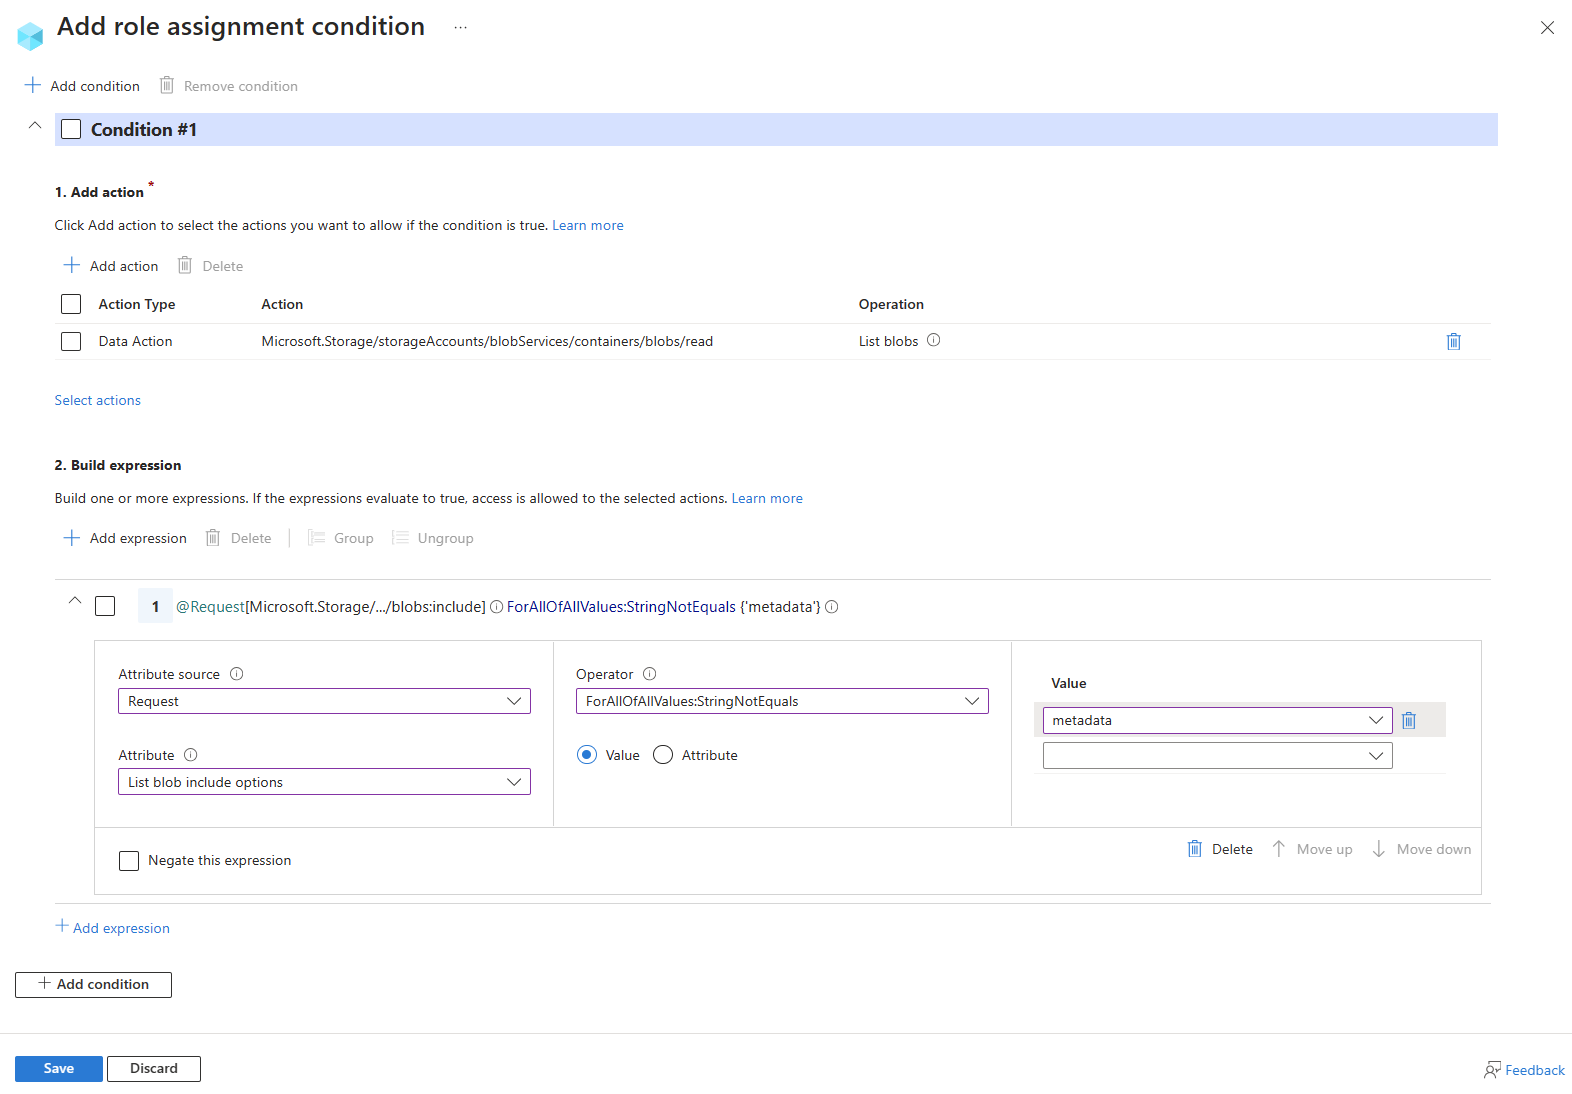 Screenshot of condition editor in Azure portal showing a condition to restrict a user from listing blobs when metadata is included in the request.